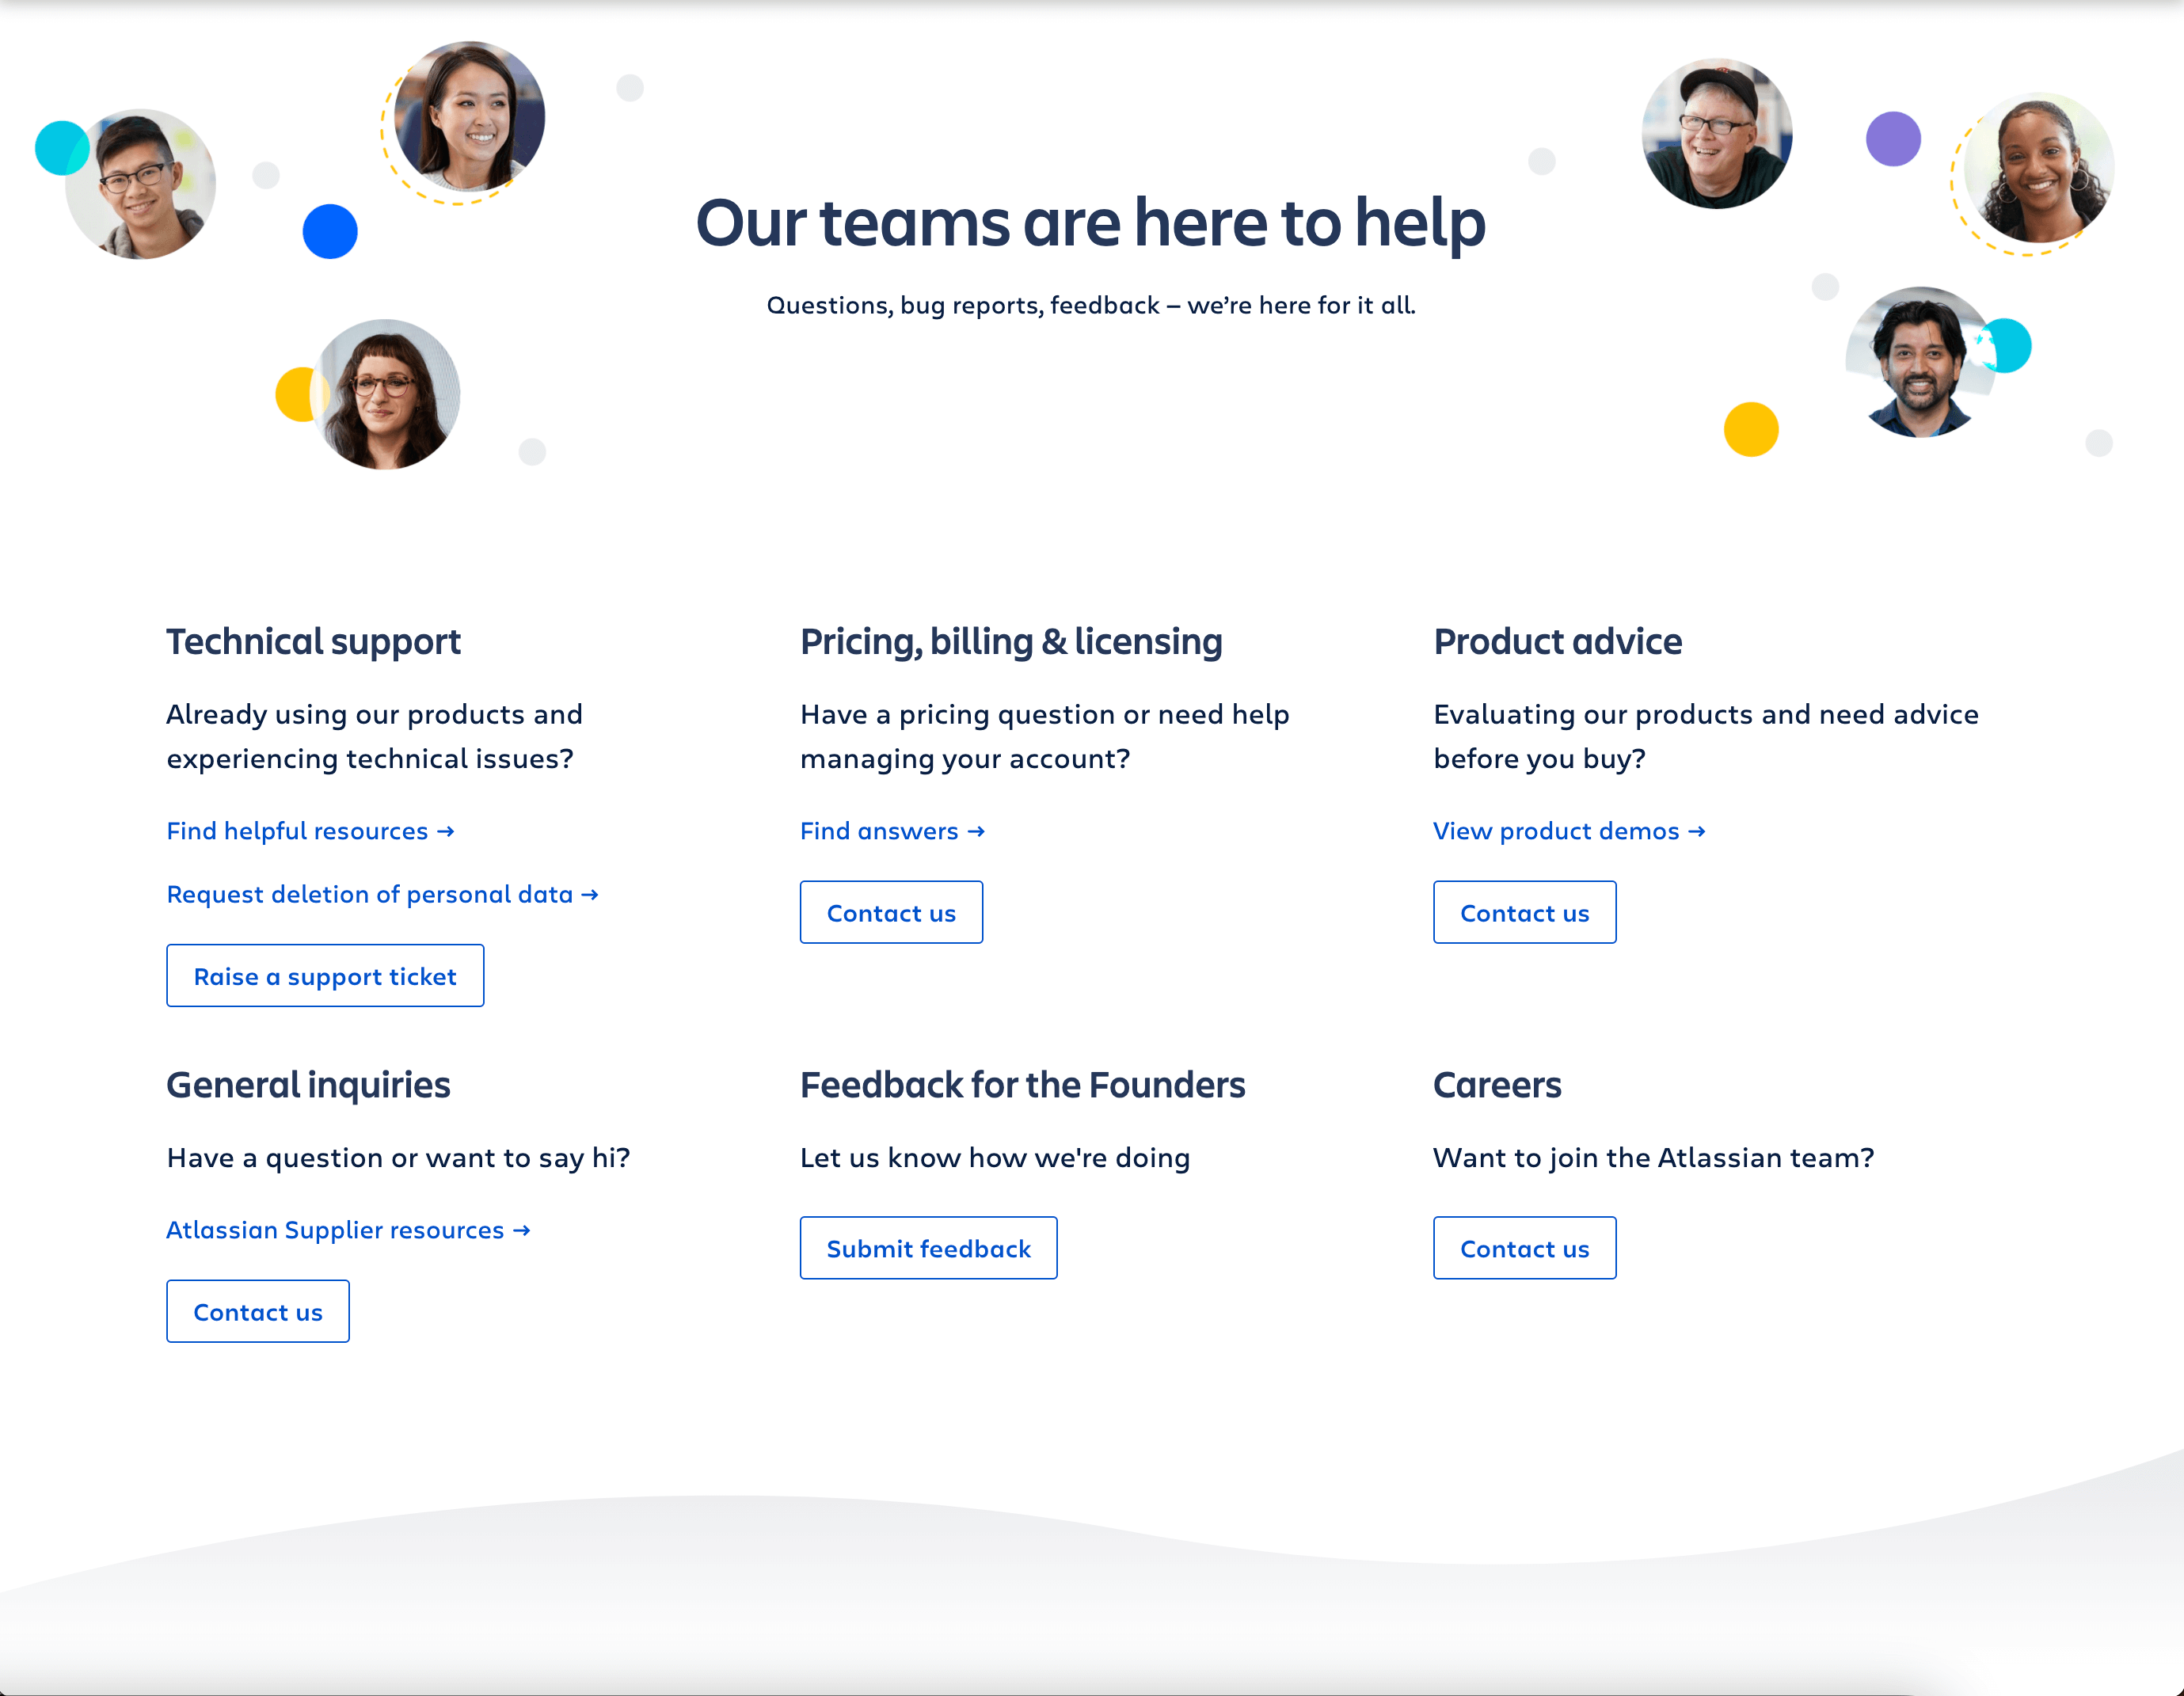 Atlassian's Contact Us page